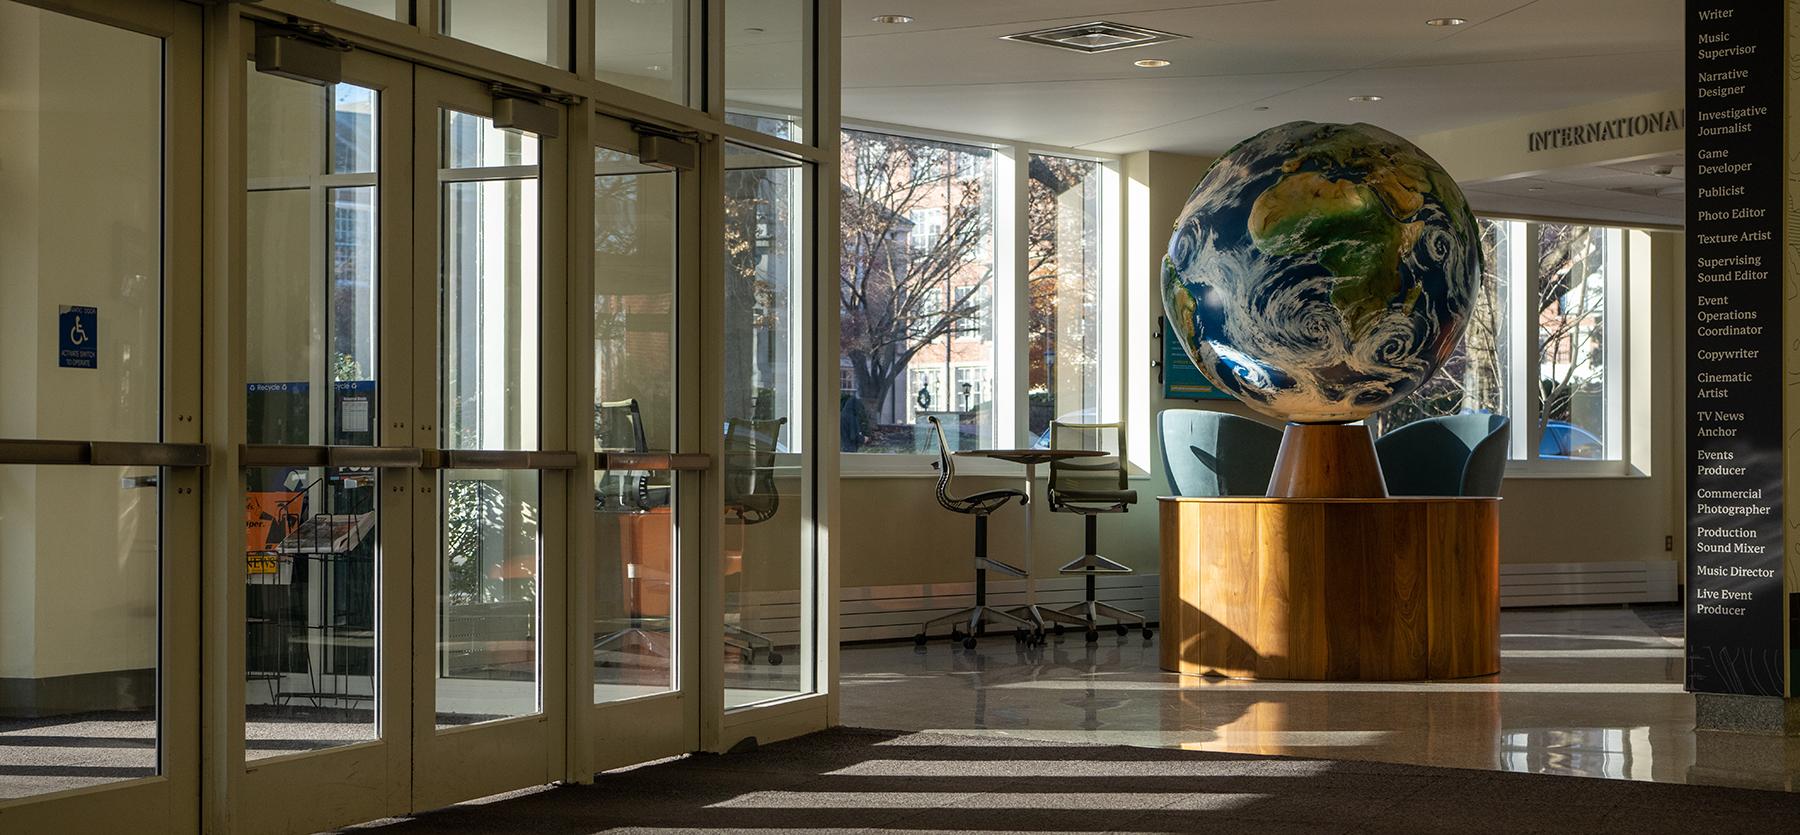 The lobby of the Schoonover Center, which houses the Scripps College of Communication, featuring light filtering in the doors and a giant globe